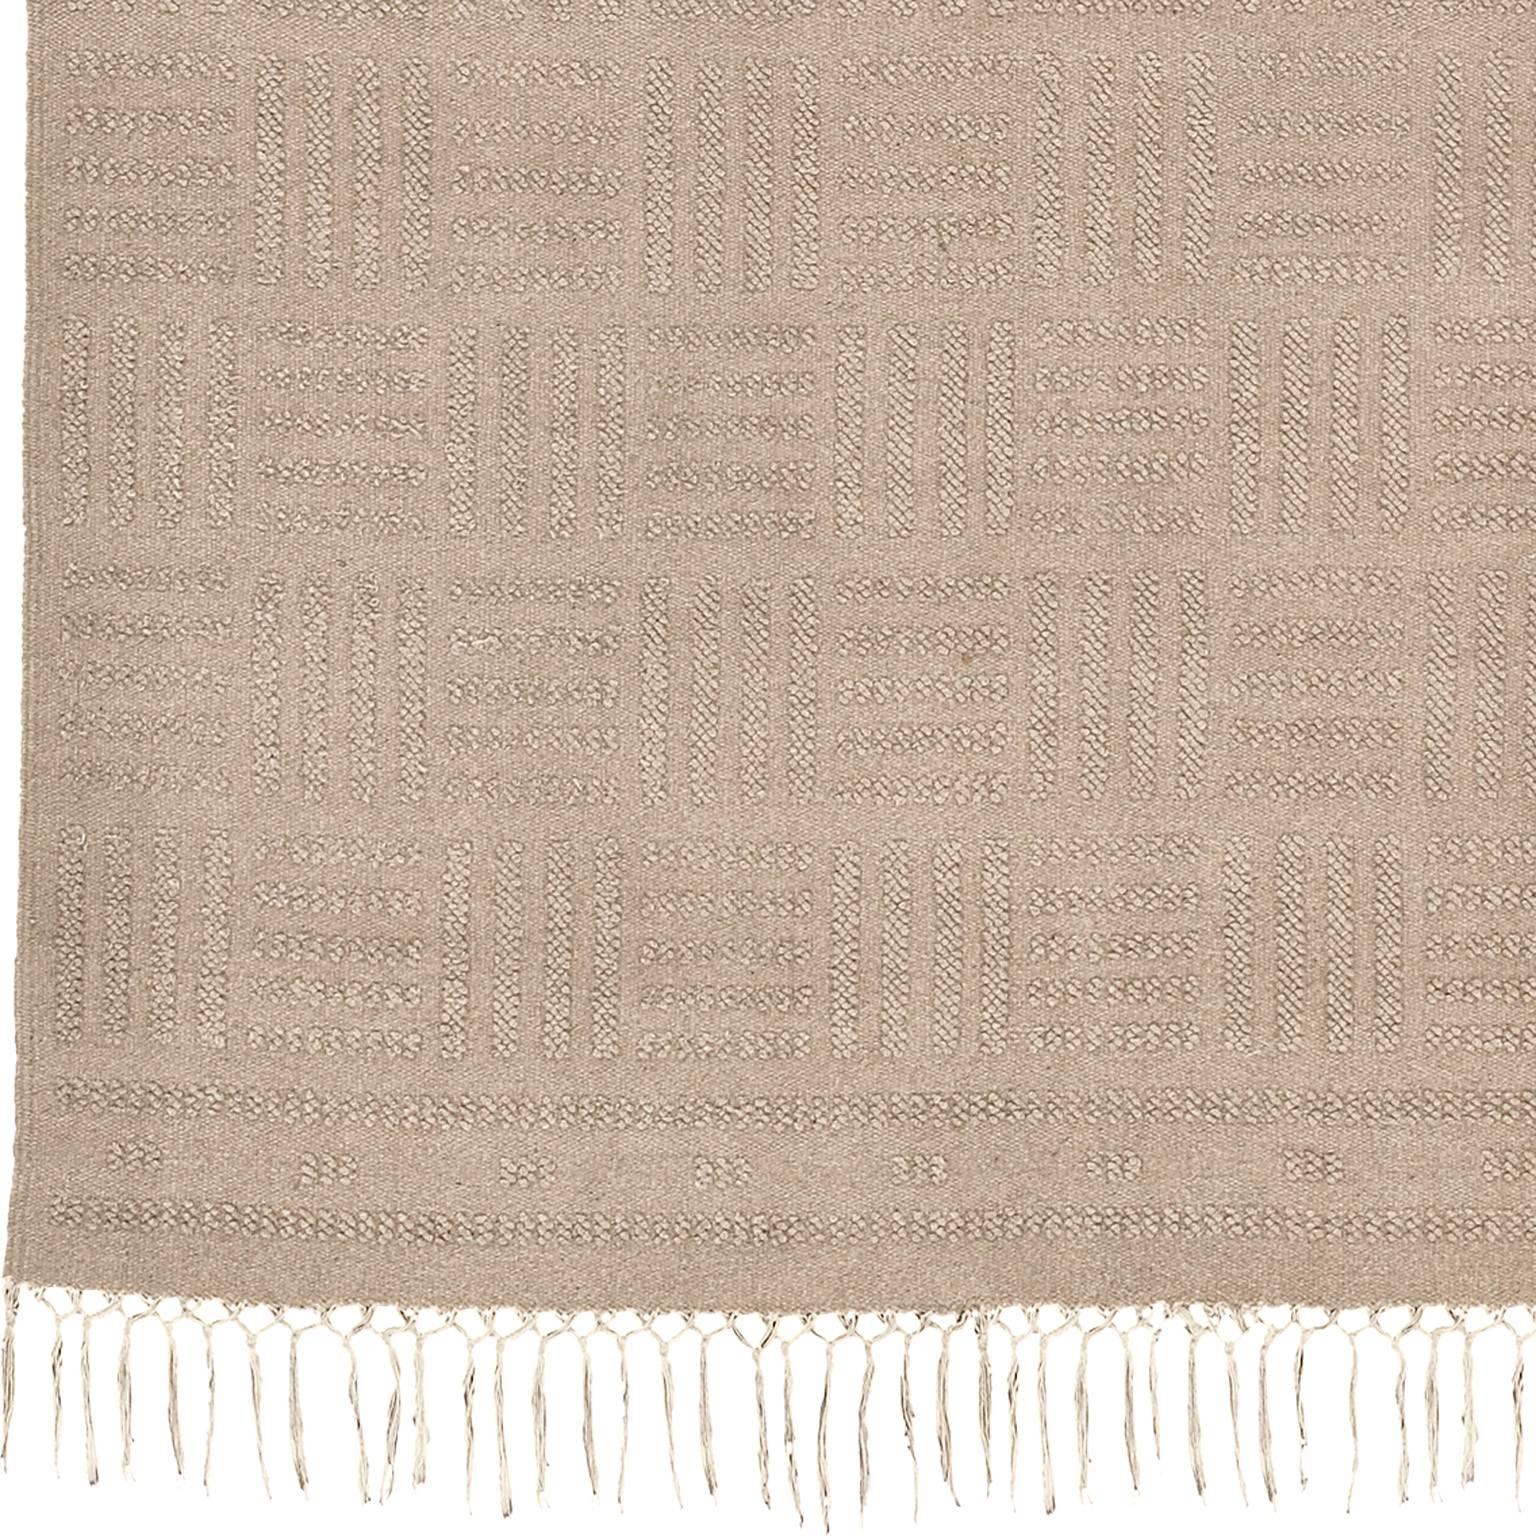 Mid-20th century Finnish flat-weave rug
Finland, circa 1930.
Flat-weave and loop technique.
Handwoven.